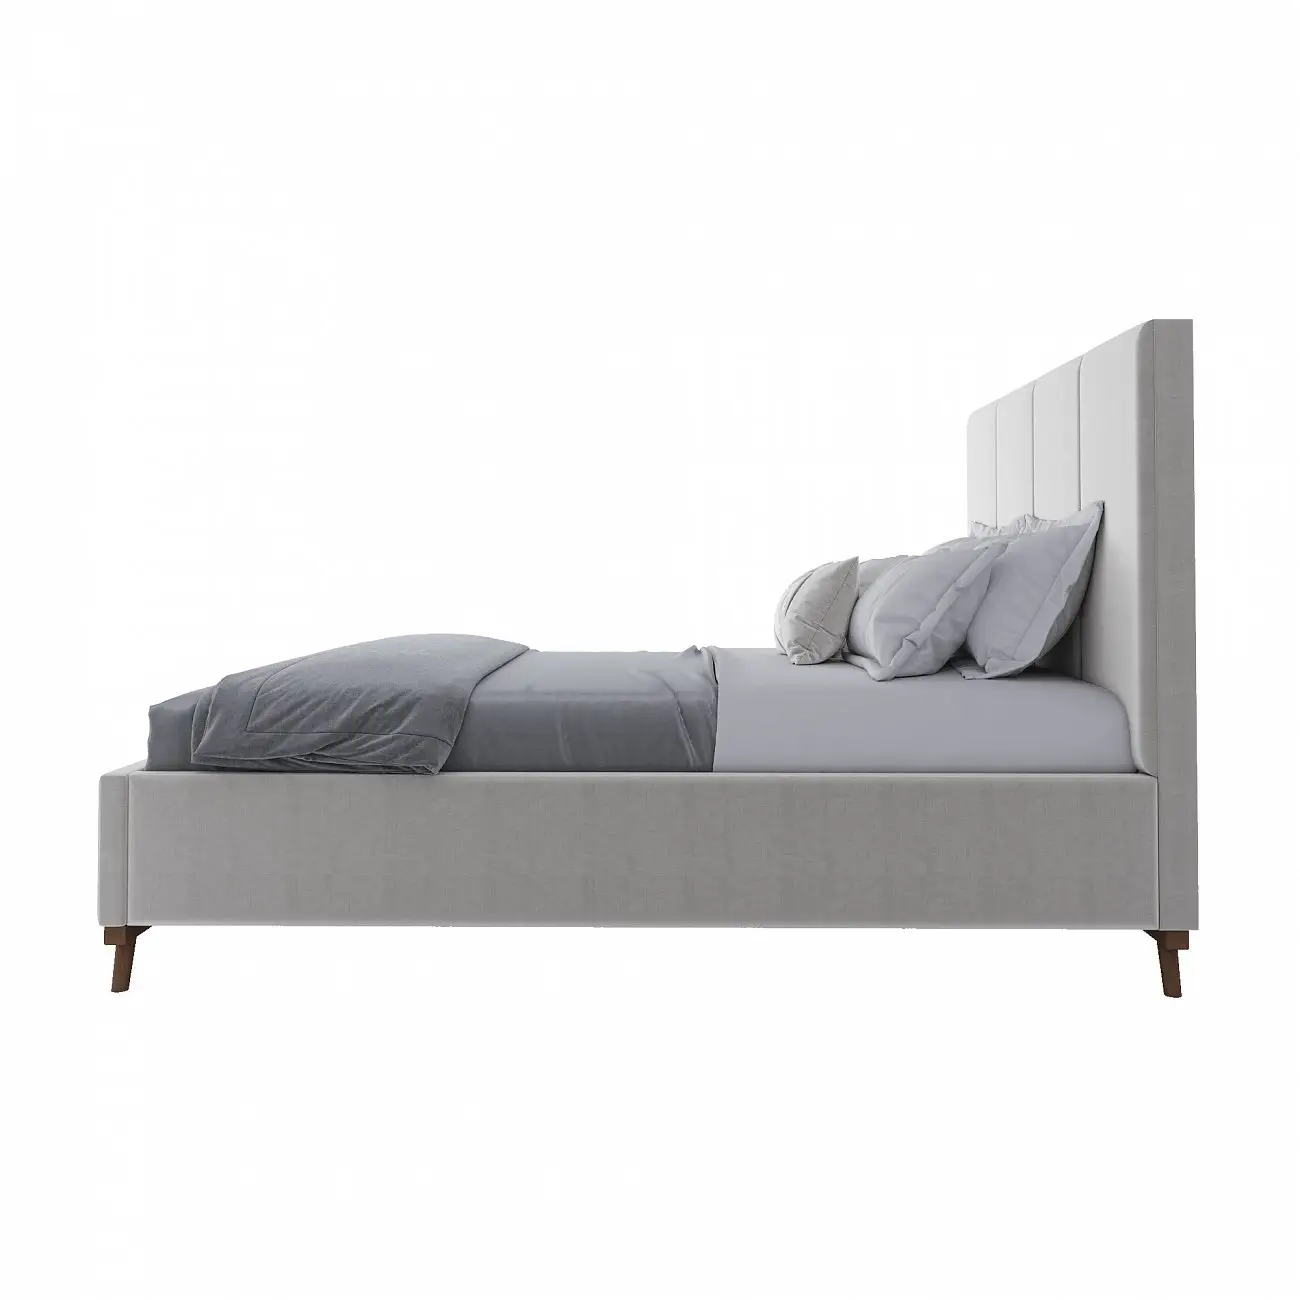 Double bed with upholstered headboard 160x200 cm white Carter Snowfall